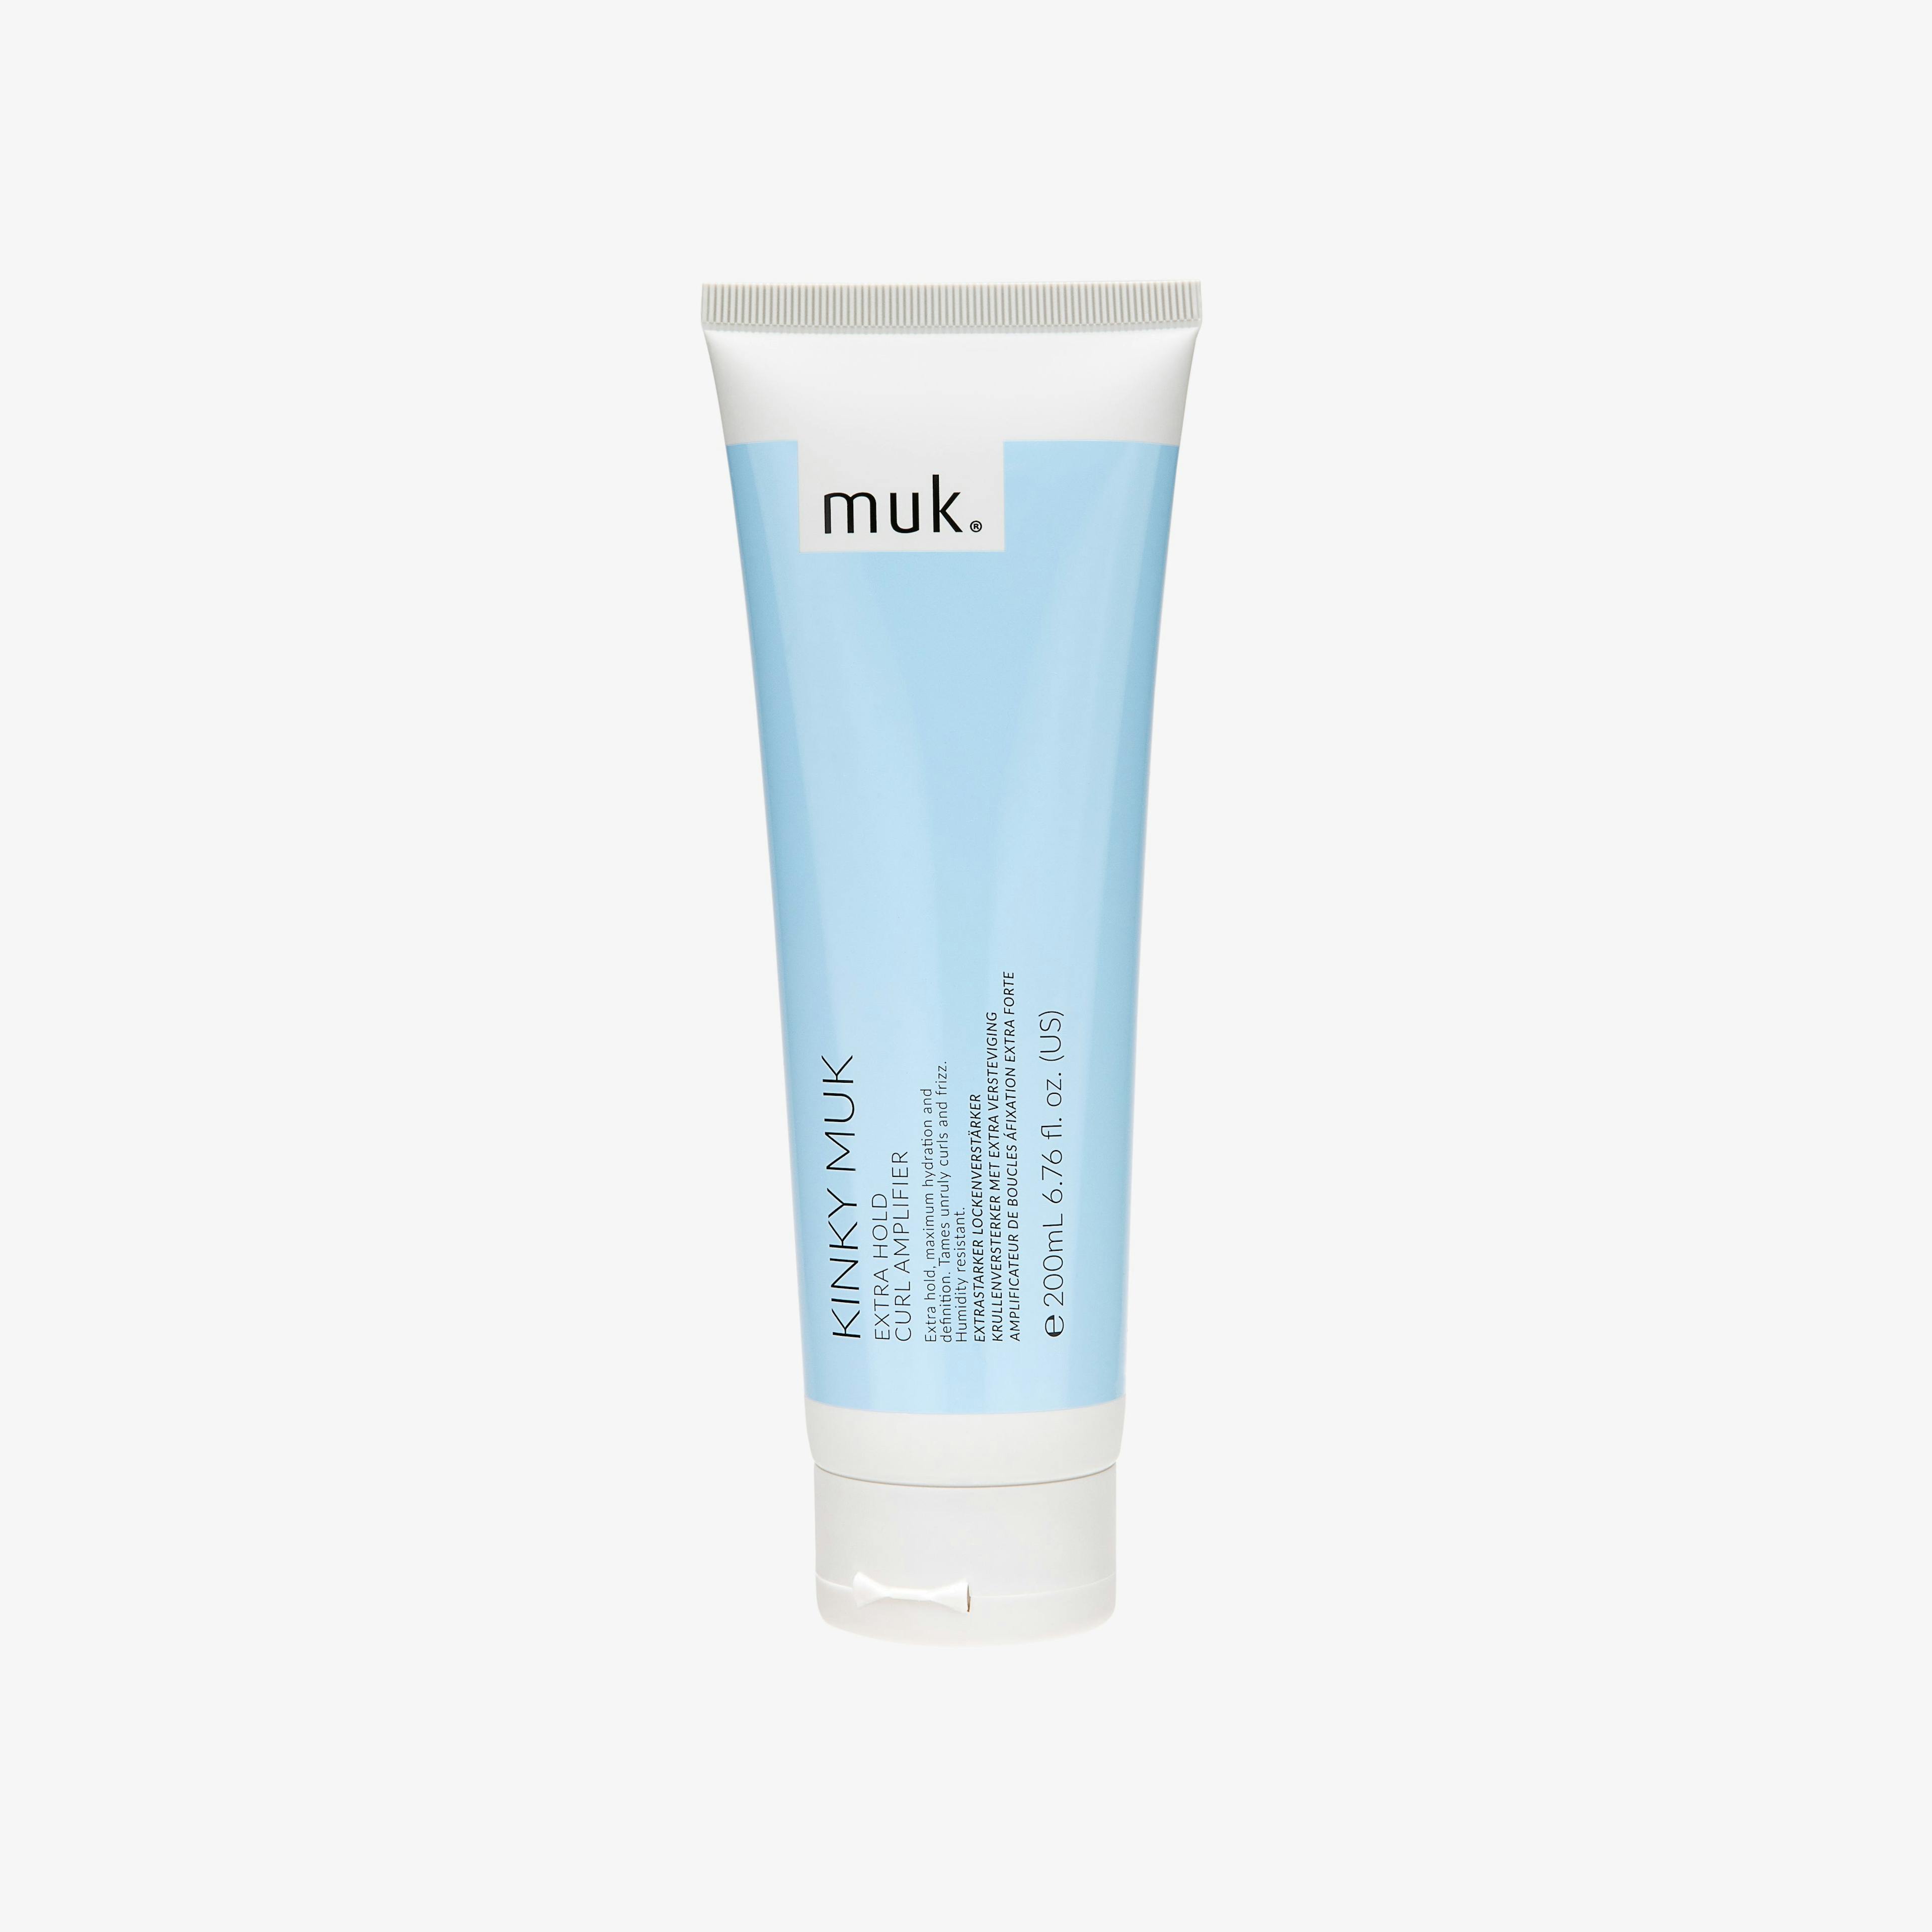 Muk Kinky Muk Curl Leave in Moisturiser and Extra Hold Curl Amplifier 200ml Duo Pack